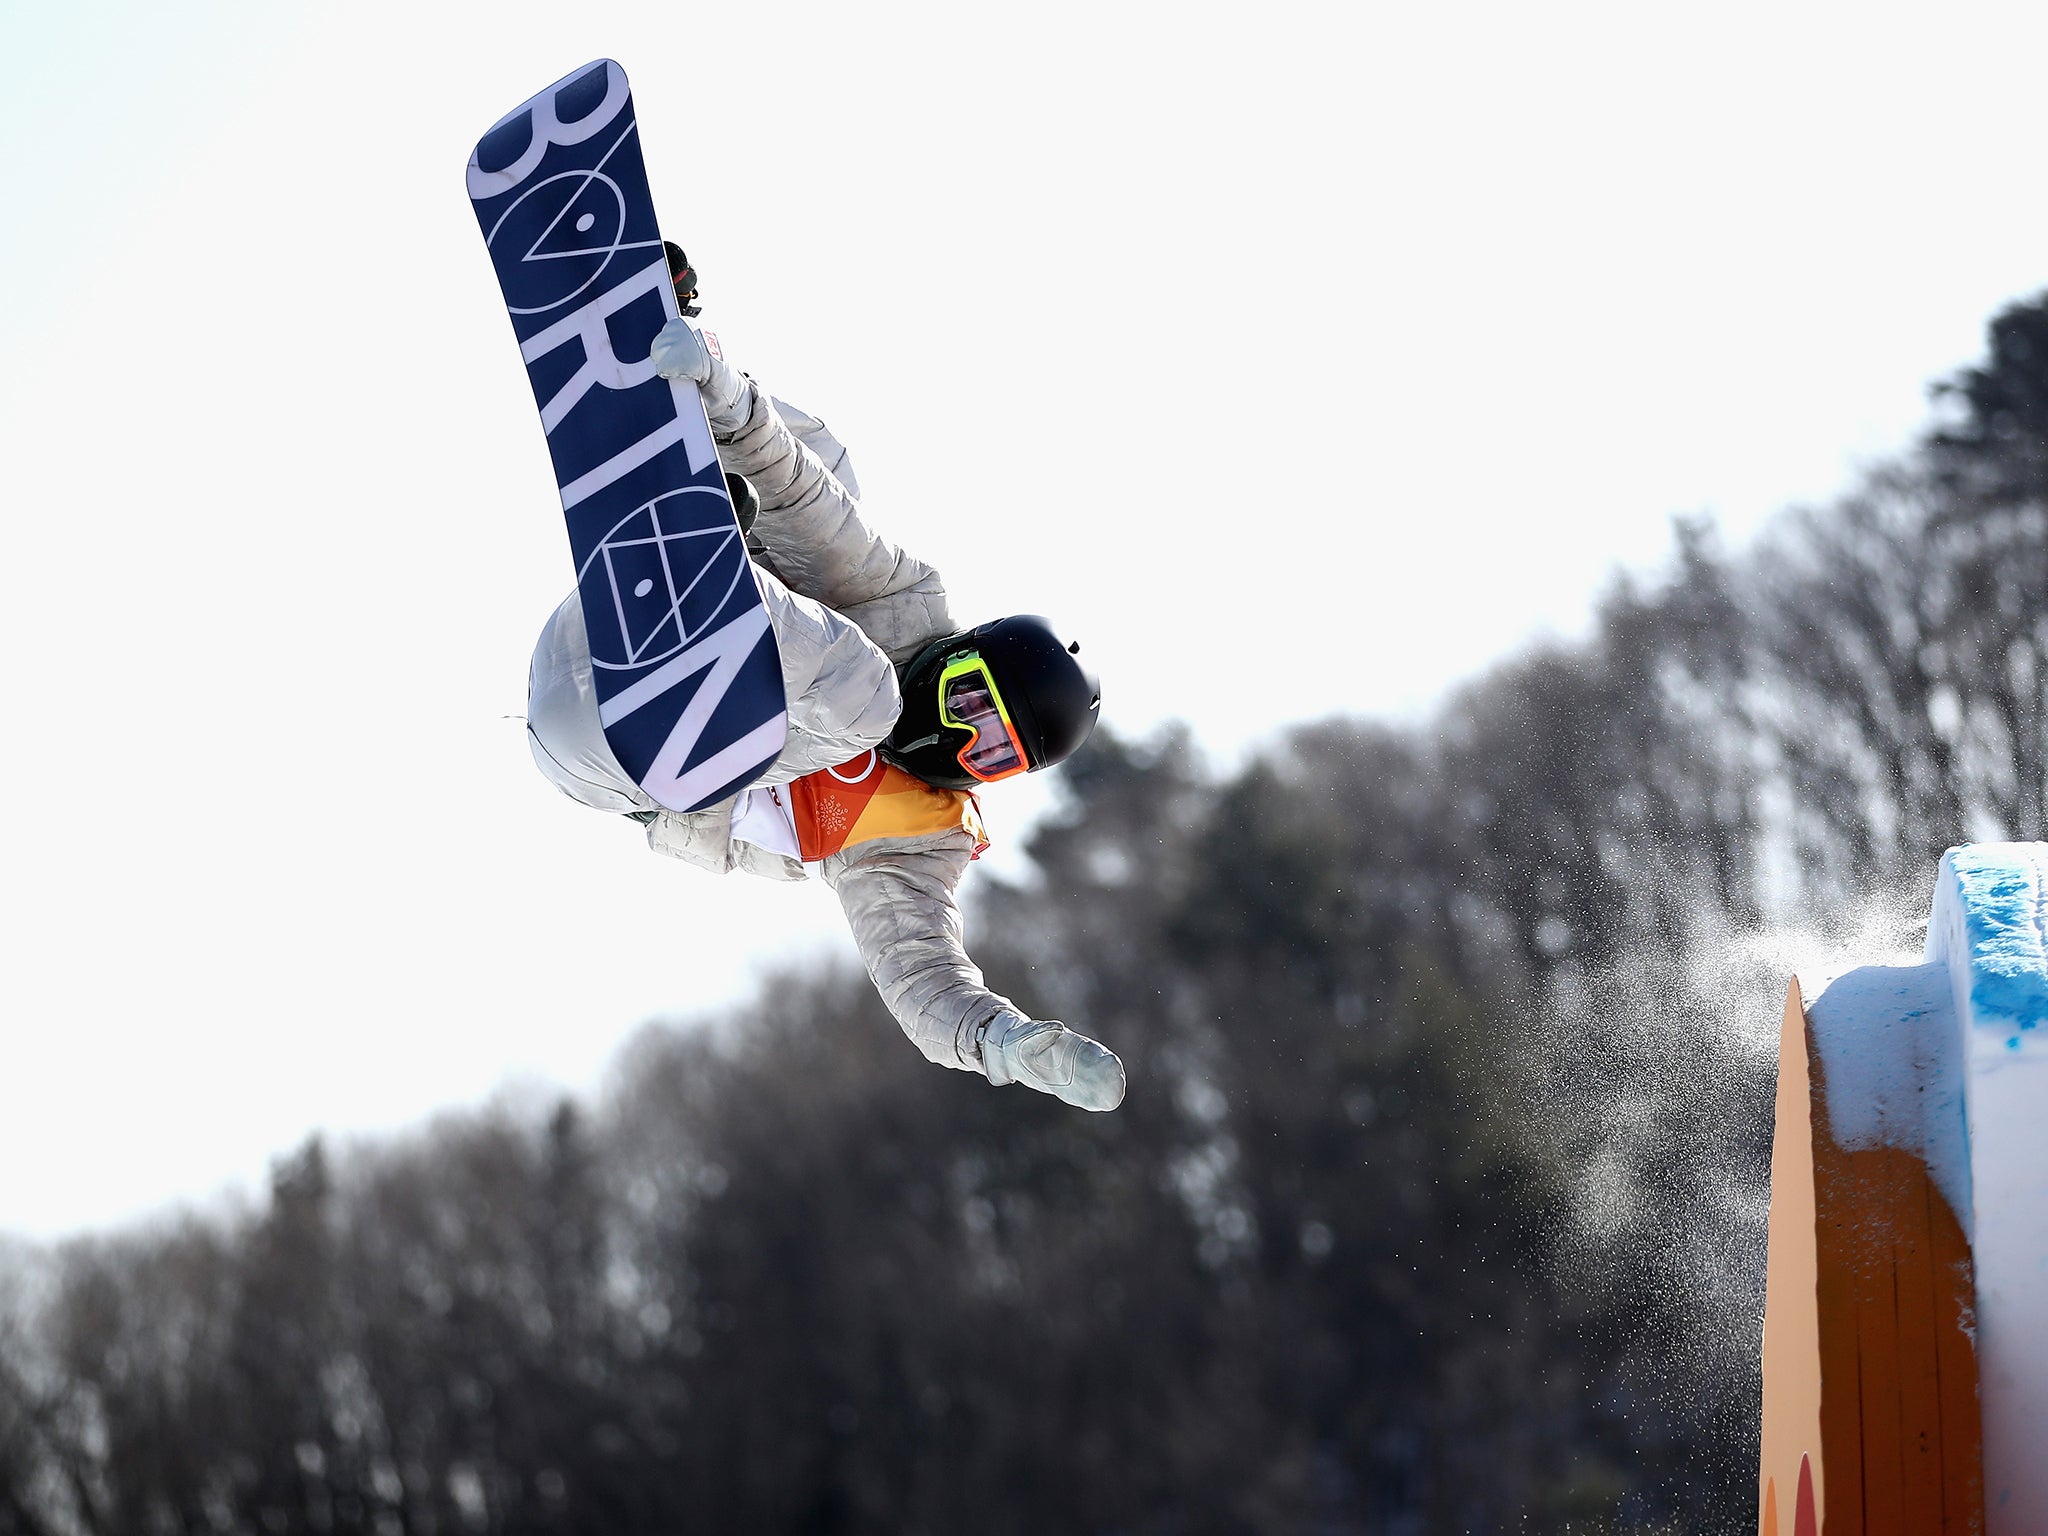 Gerard won the gold medal with his third and final run